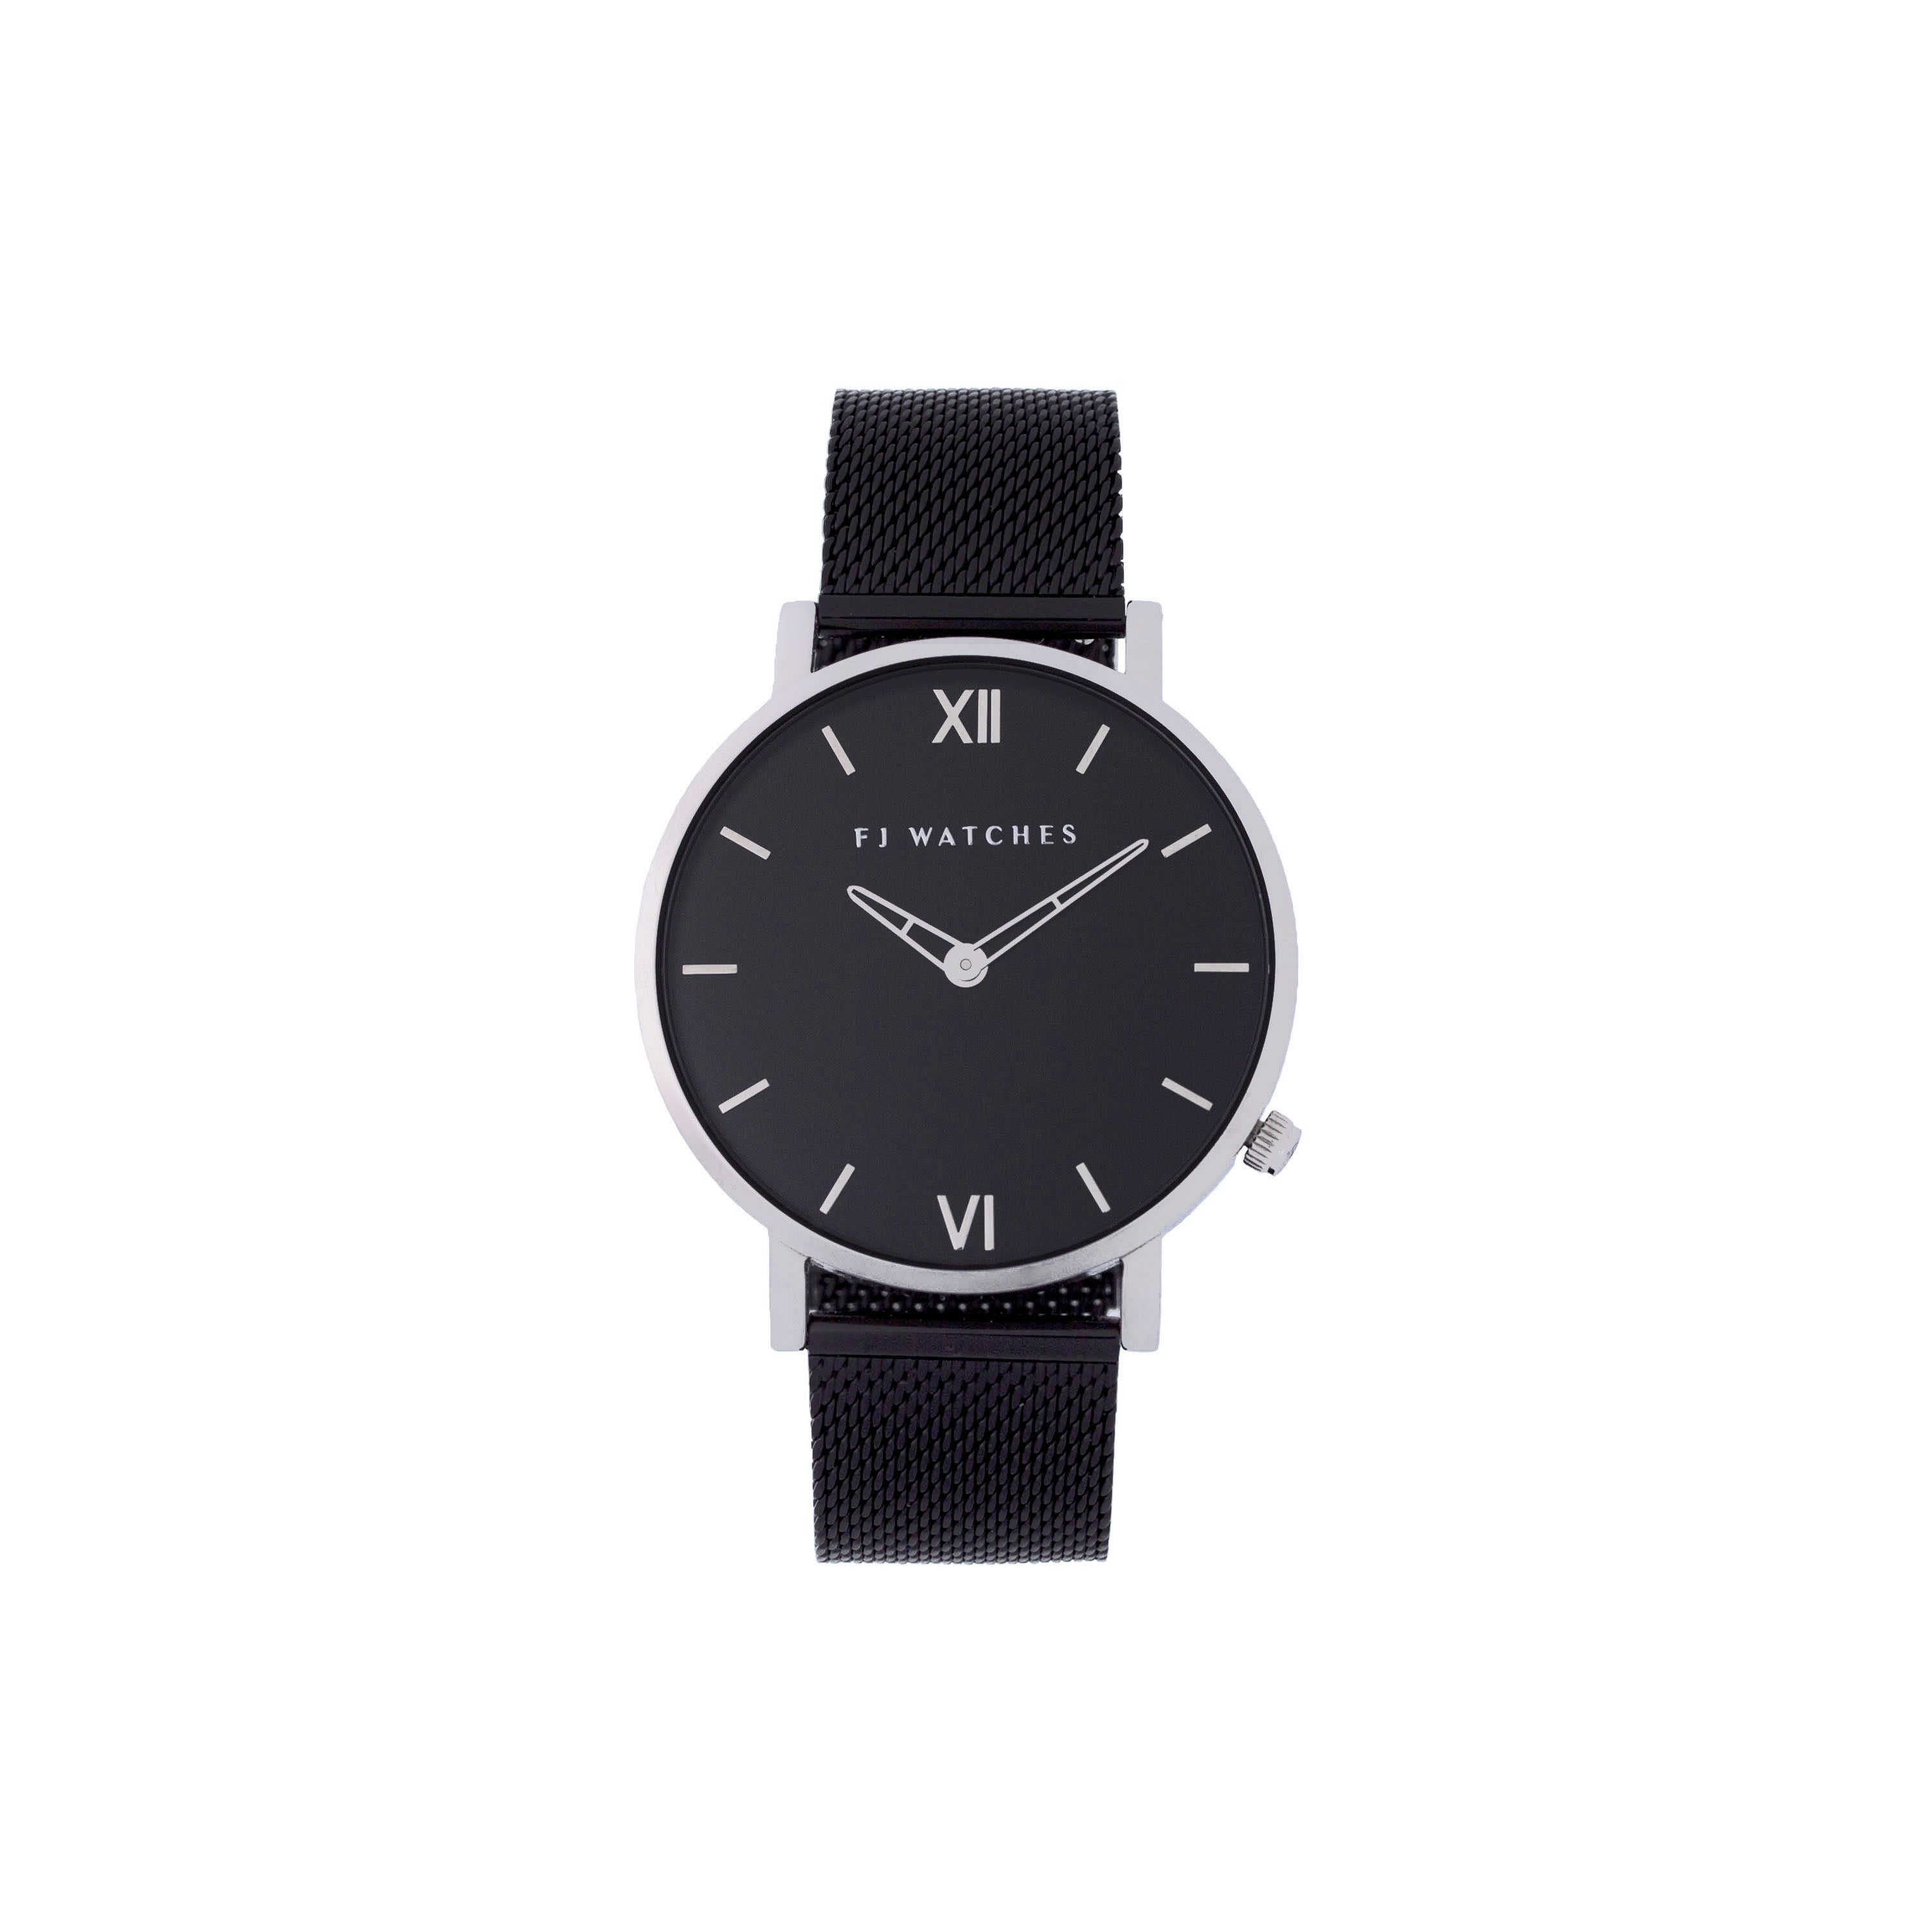 Discover Silver moon, a 36mm women's watch from Five Jwlry with a black and silver dial. This one can be paired with a silver or black mesh bracelet!